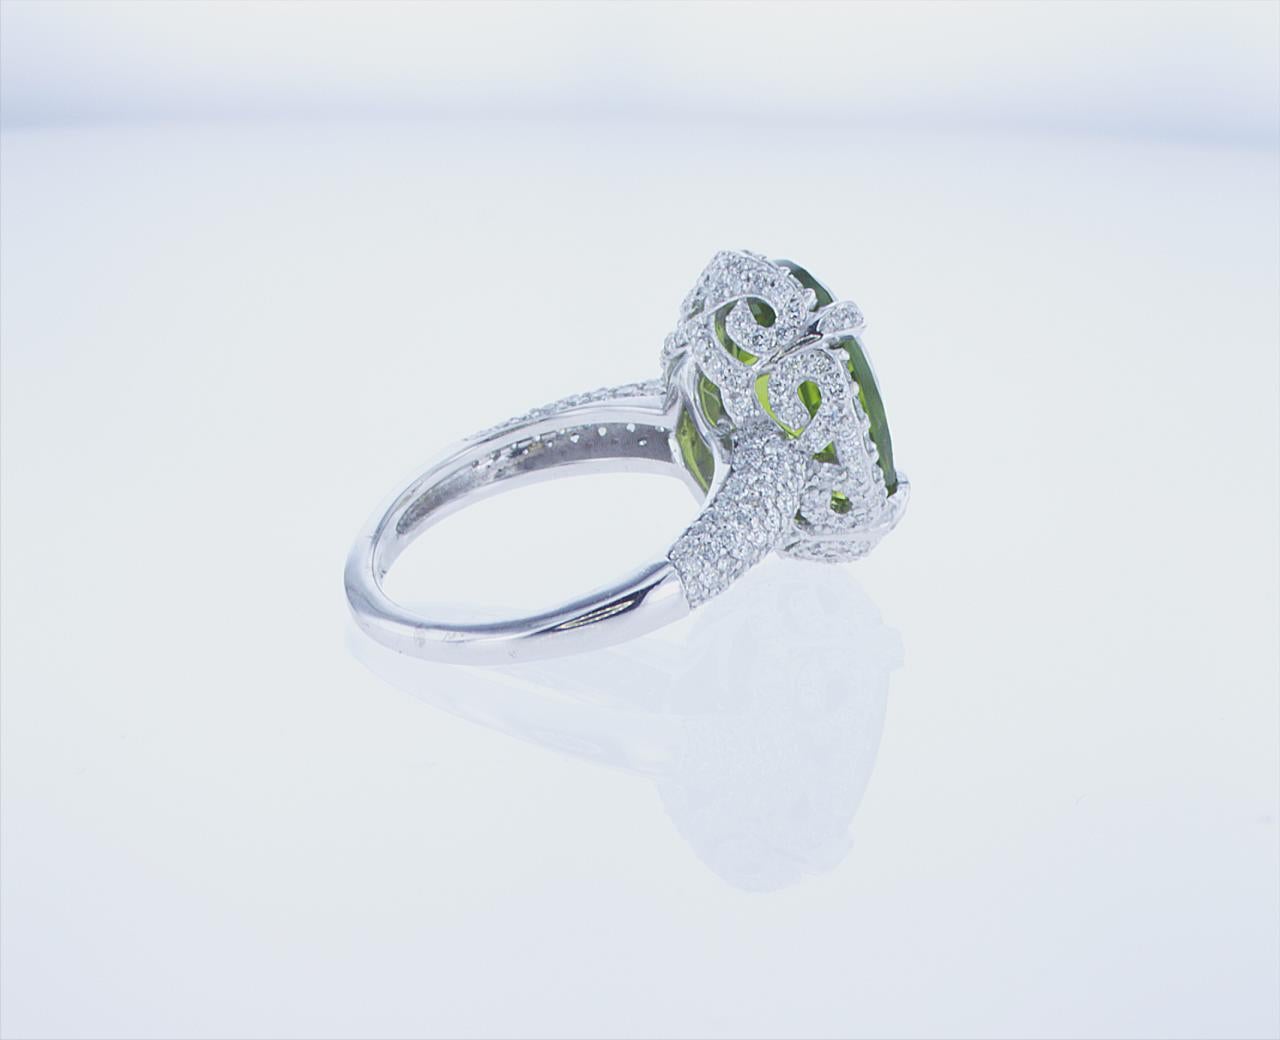 7.05 Carat Oval Peridot Cocktail Ring in 18k White Gold with Palladium In New Condition For Sale In New York, NY